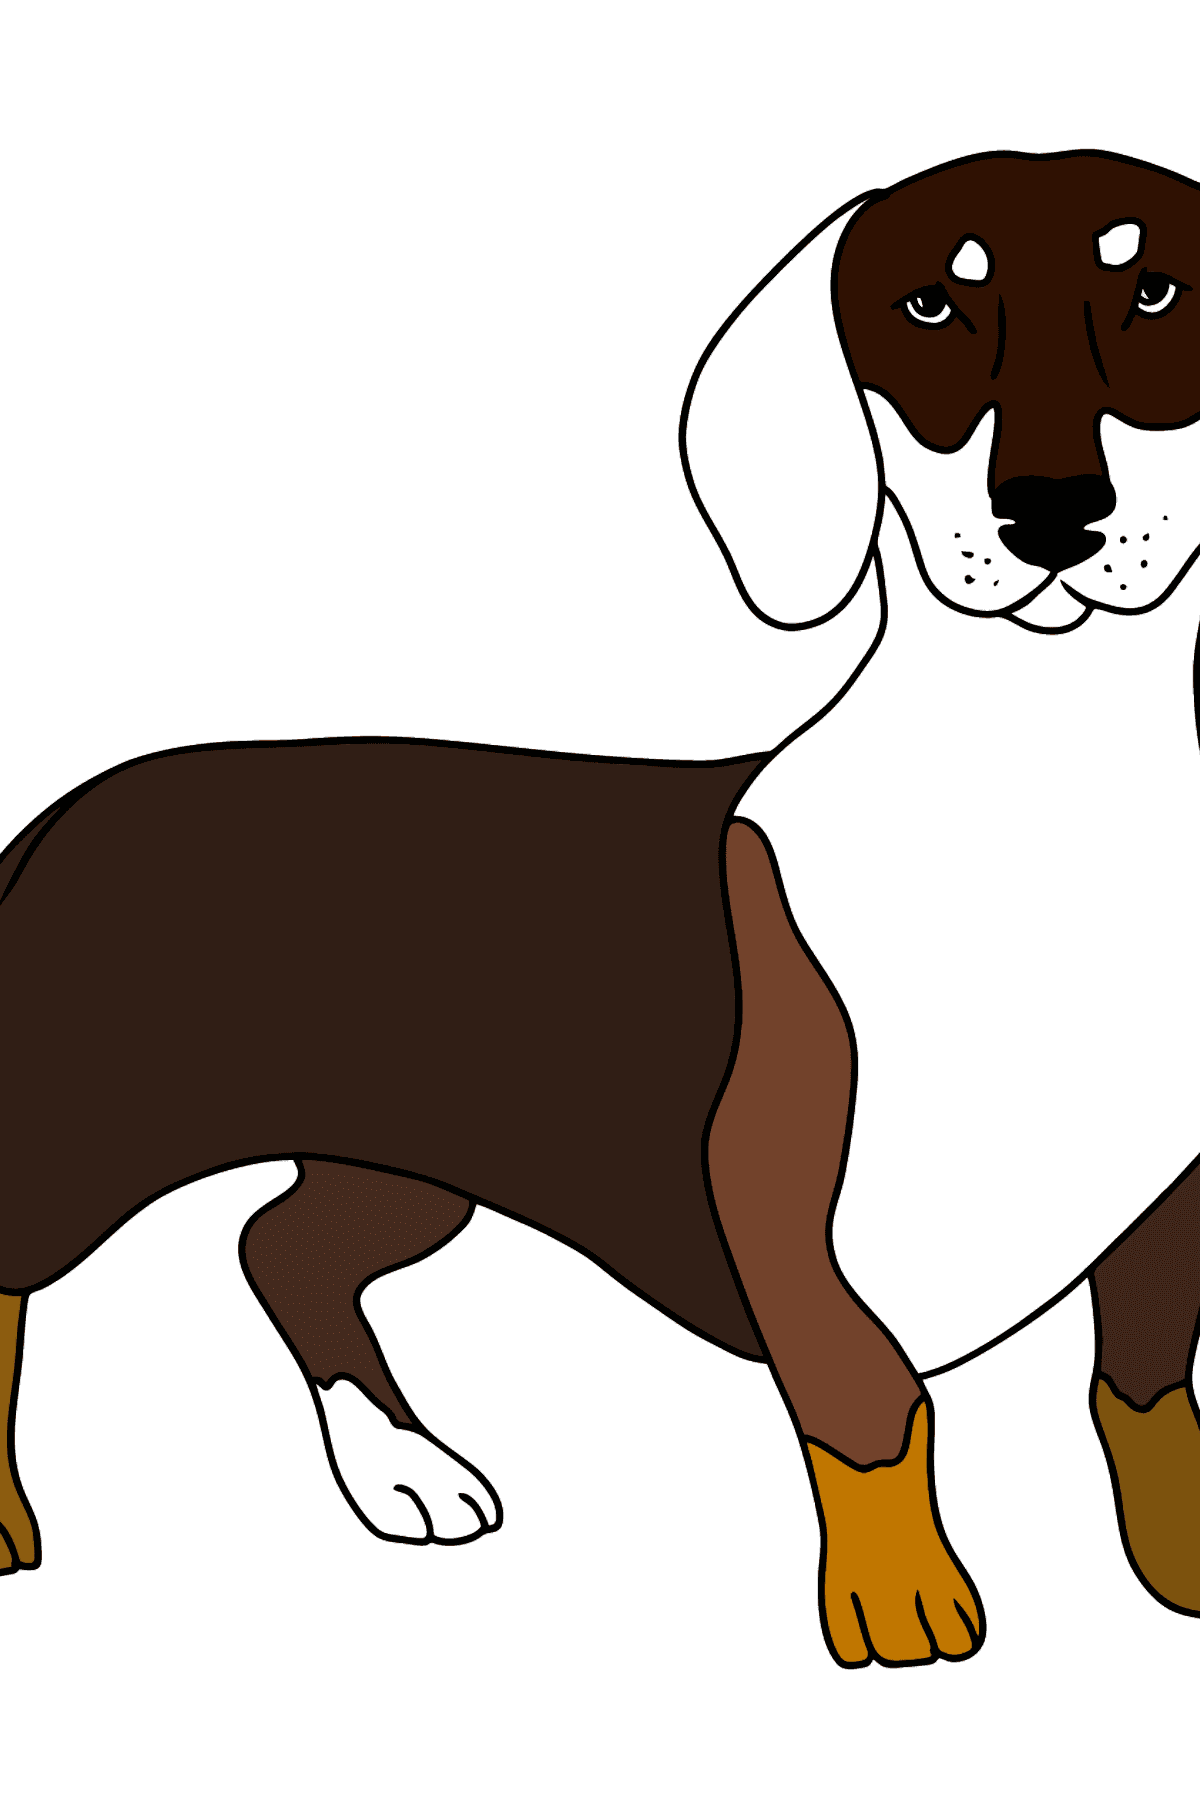 Dachshund coloring page - Coloring Pages for Kids